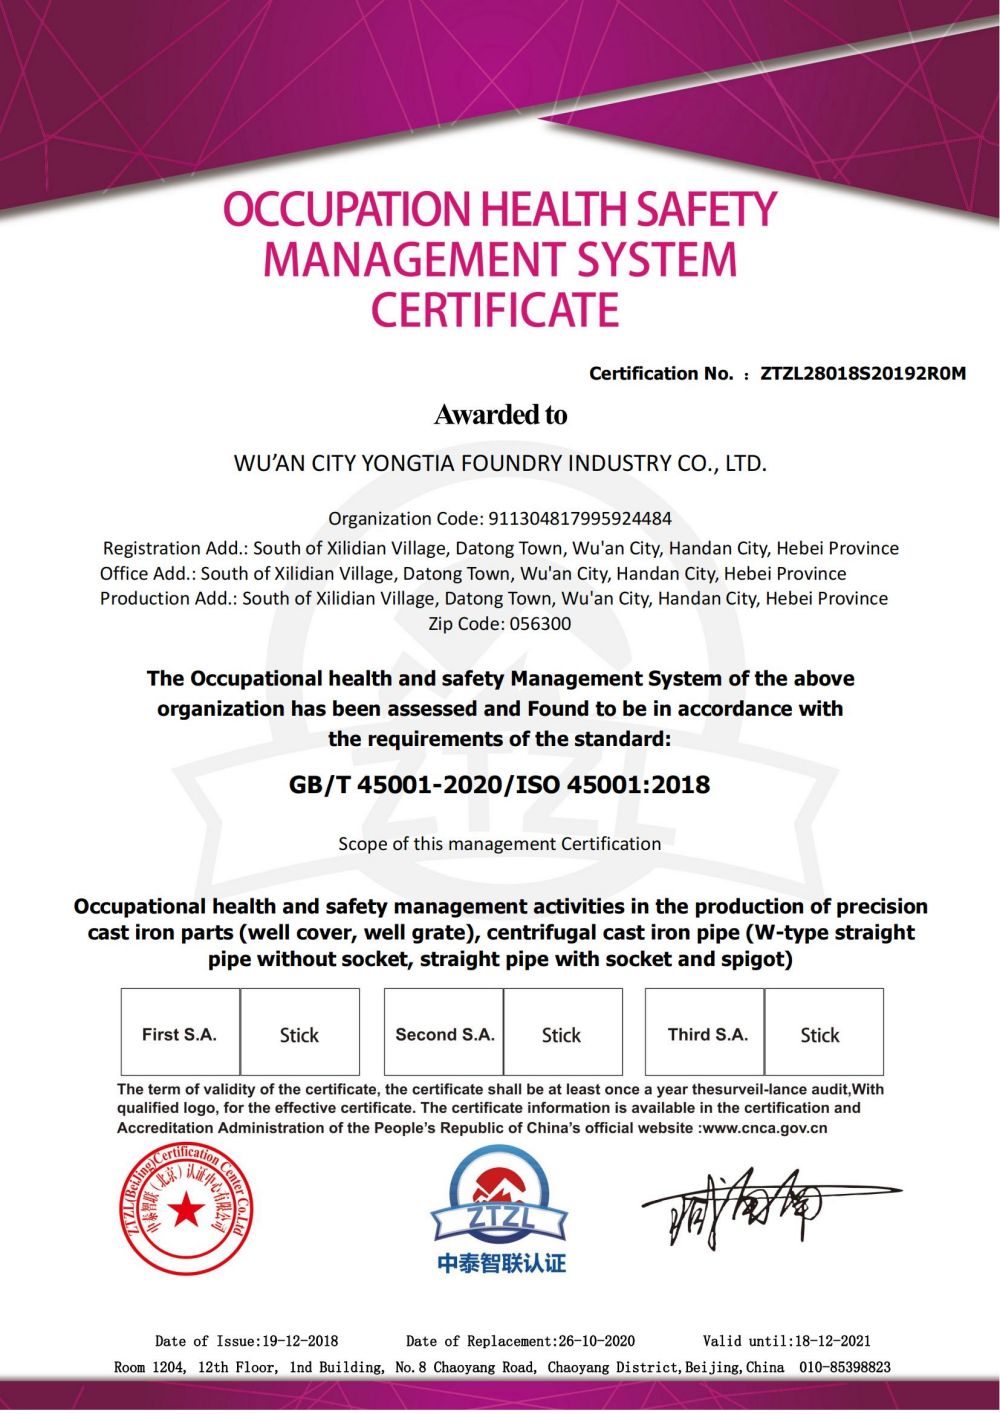 Occupational Health and Safety Management system certification